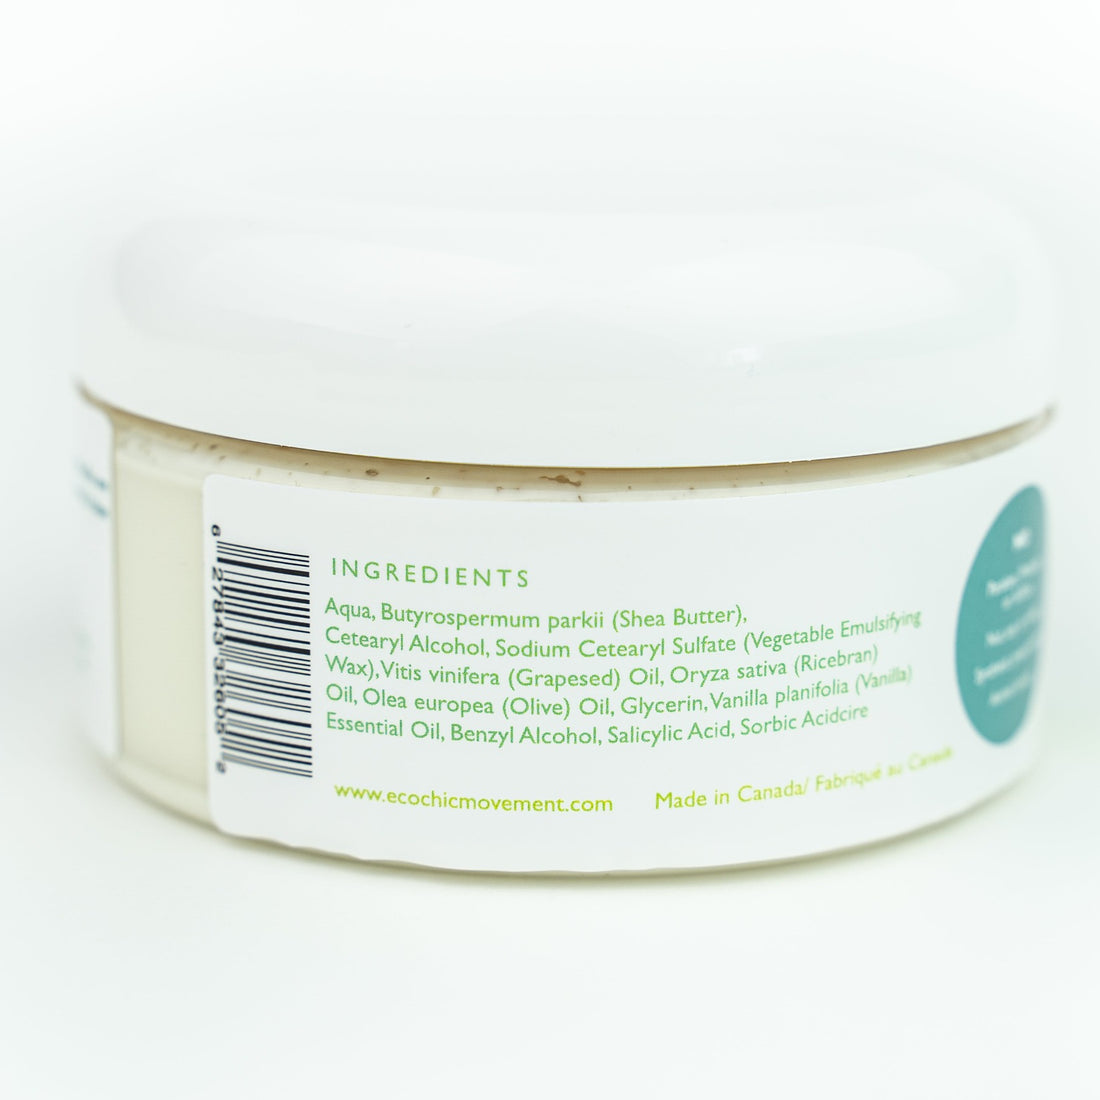 Non toxic skincare ingredients are listed on the side of a tub of natural body butter